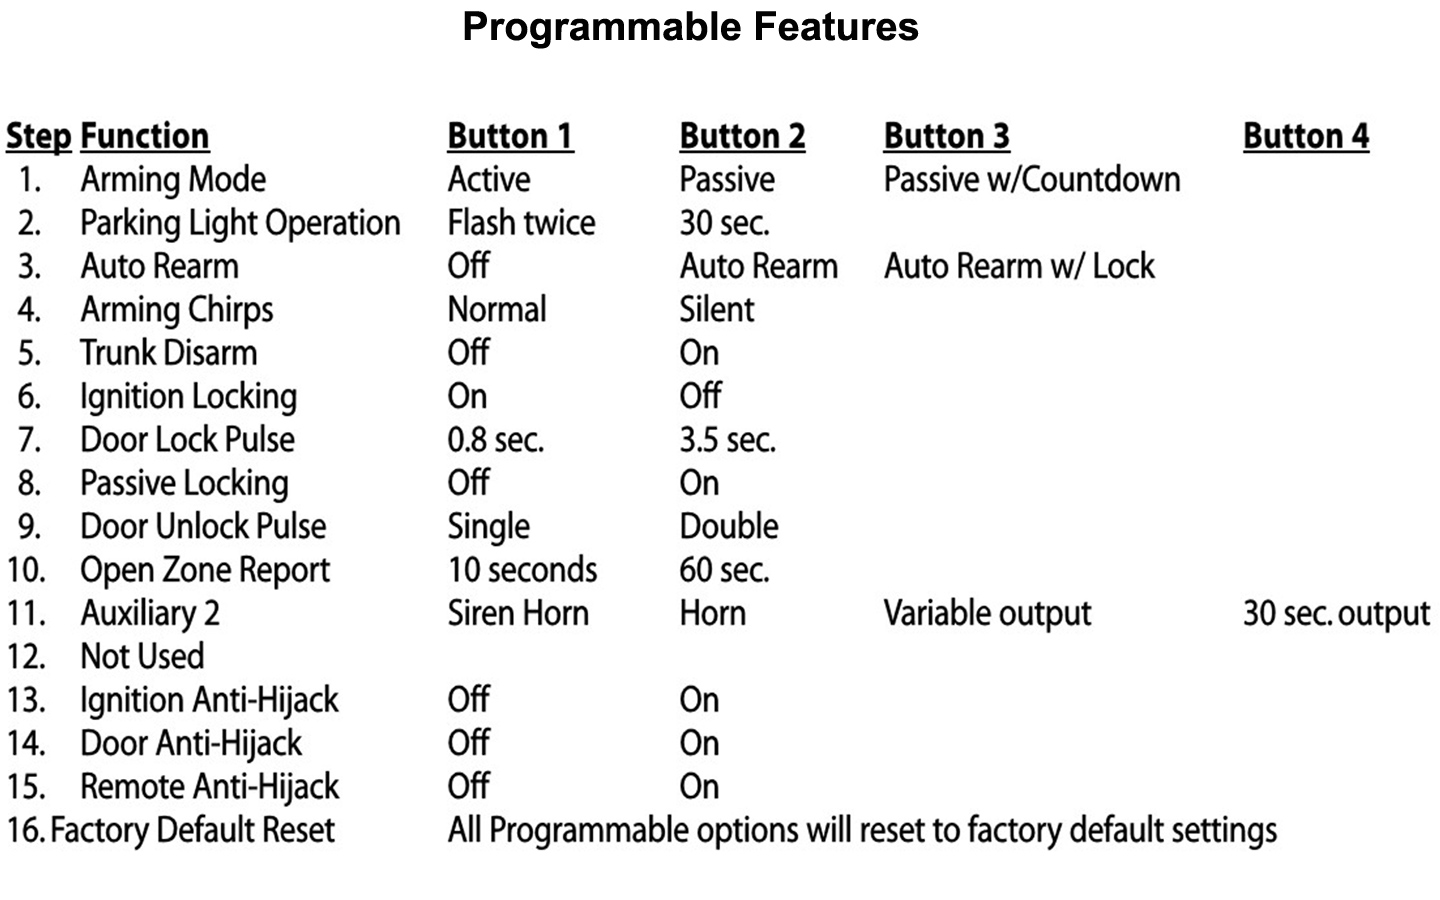 Pyle security programmable features